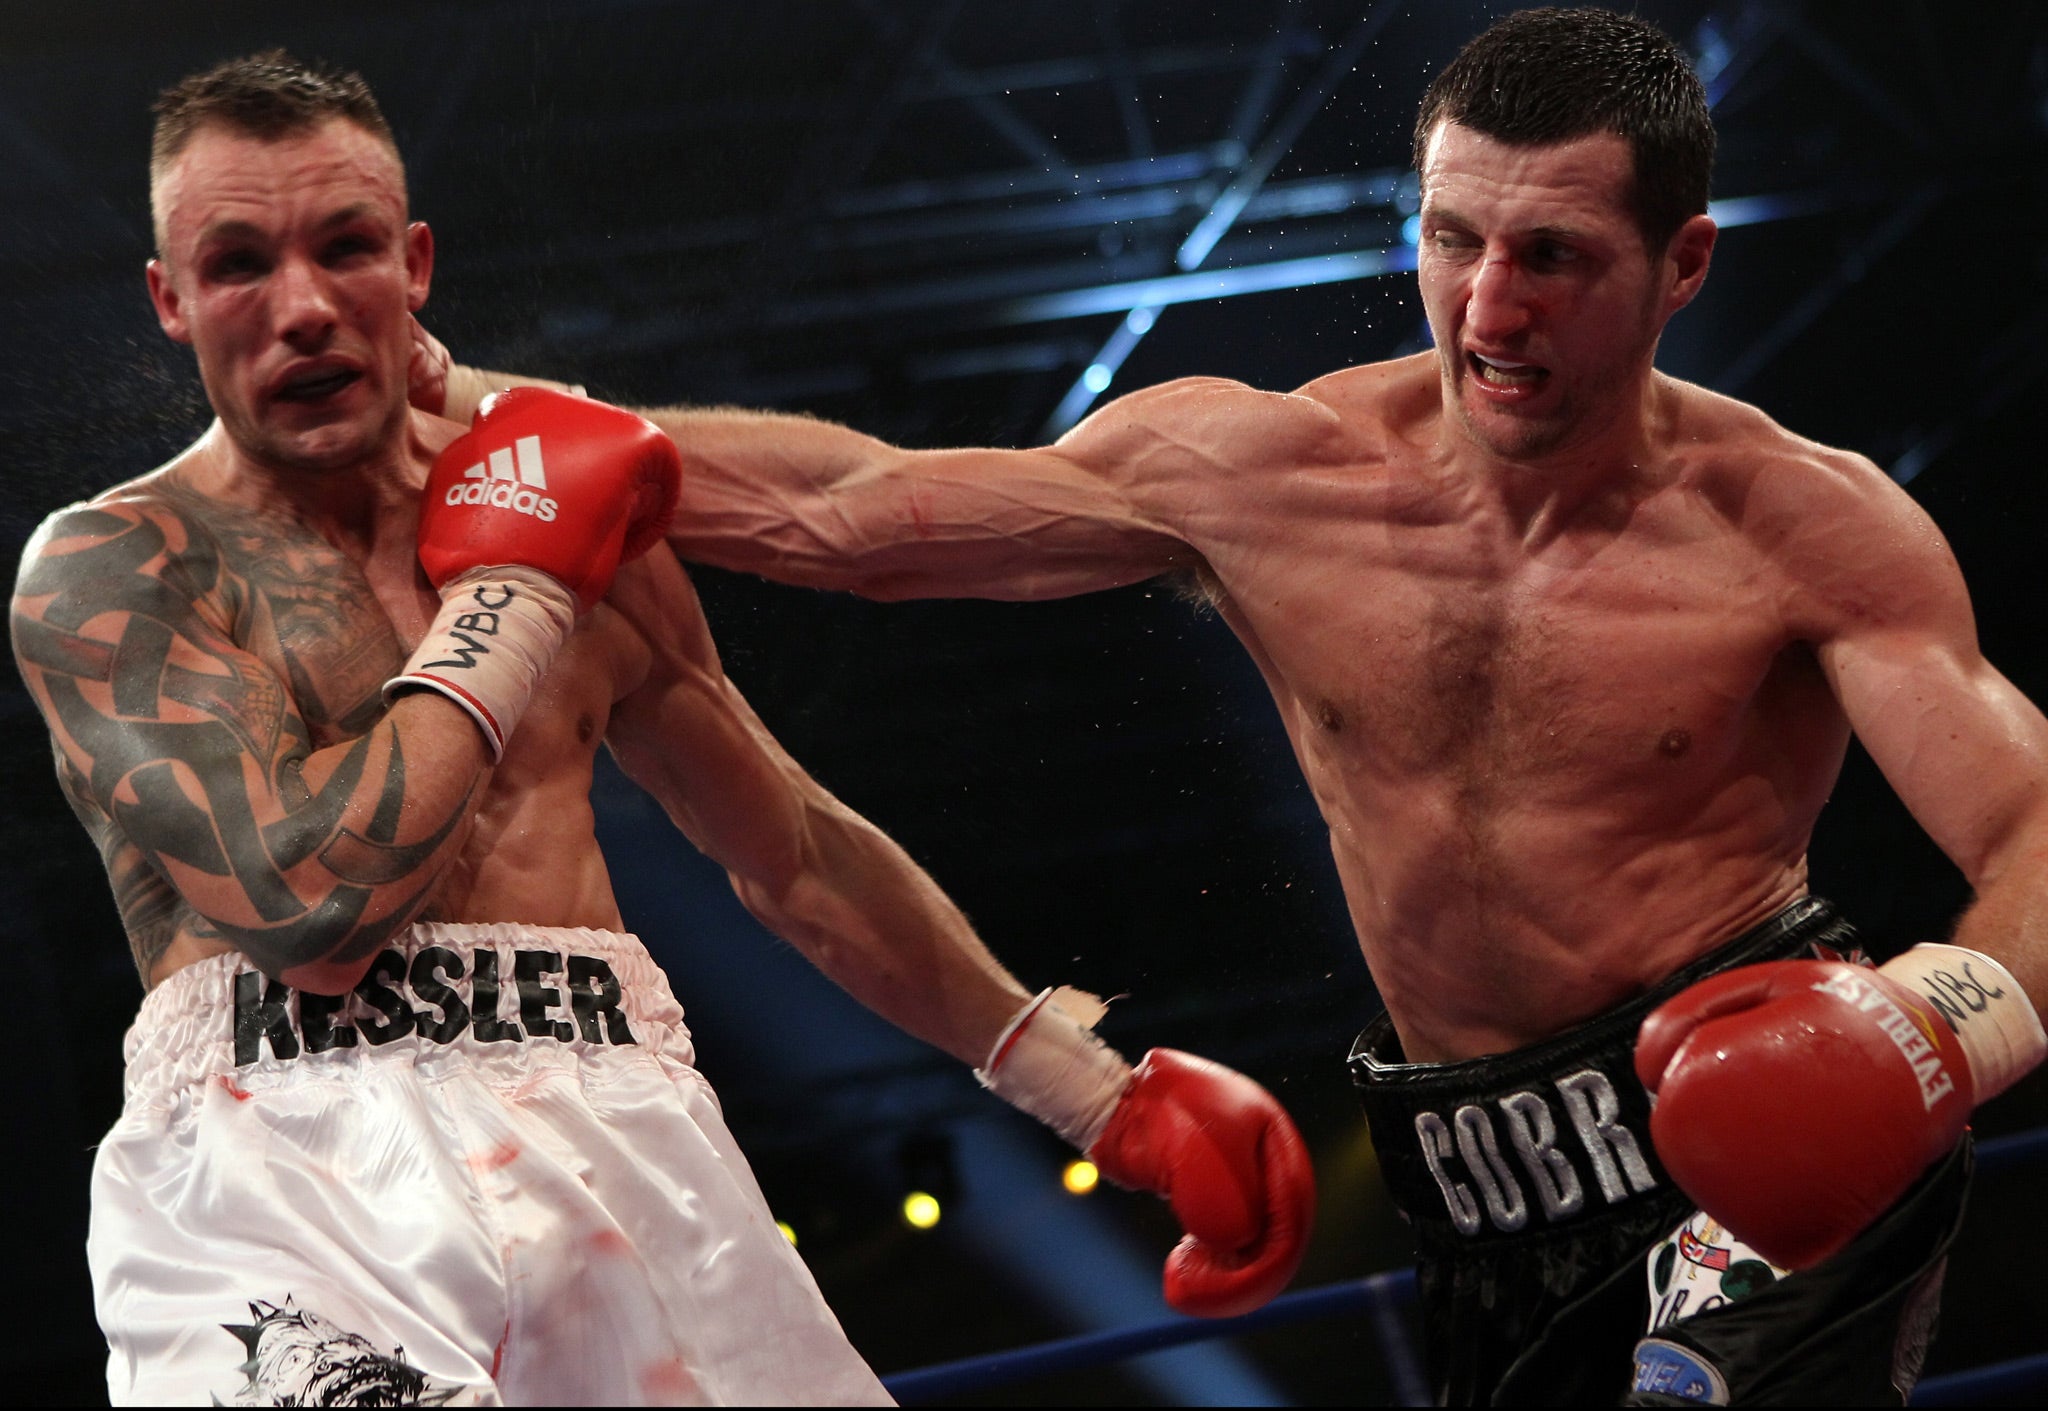 Carl Froch lands a right on Mikkel Kessler when the two first met in 2010